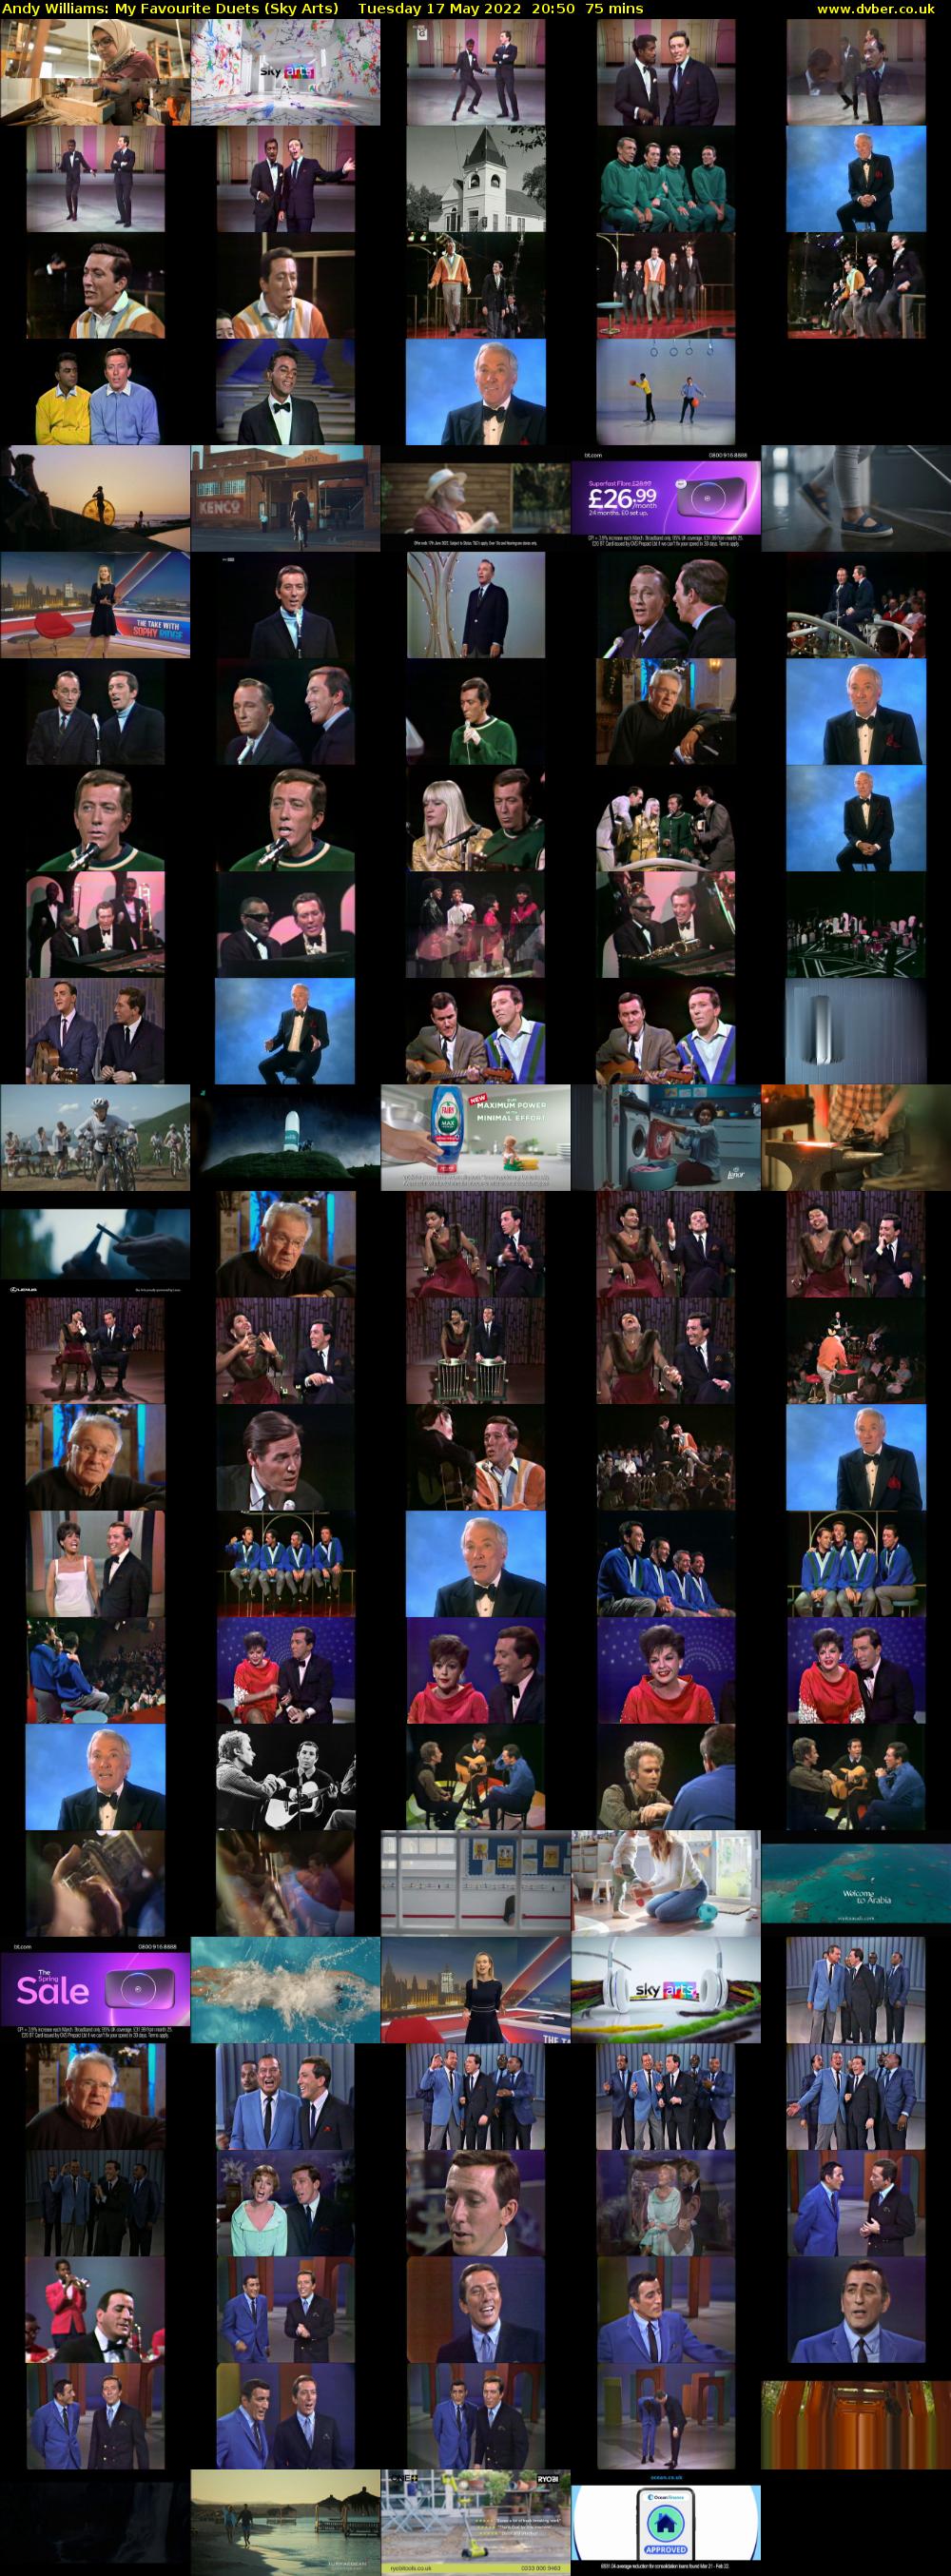 Andy Williams: My Favourite Duets (Sky Arts) Tuesday 17 May 2022 20:50 - 22:05